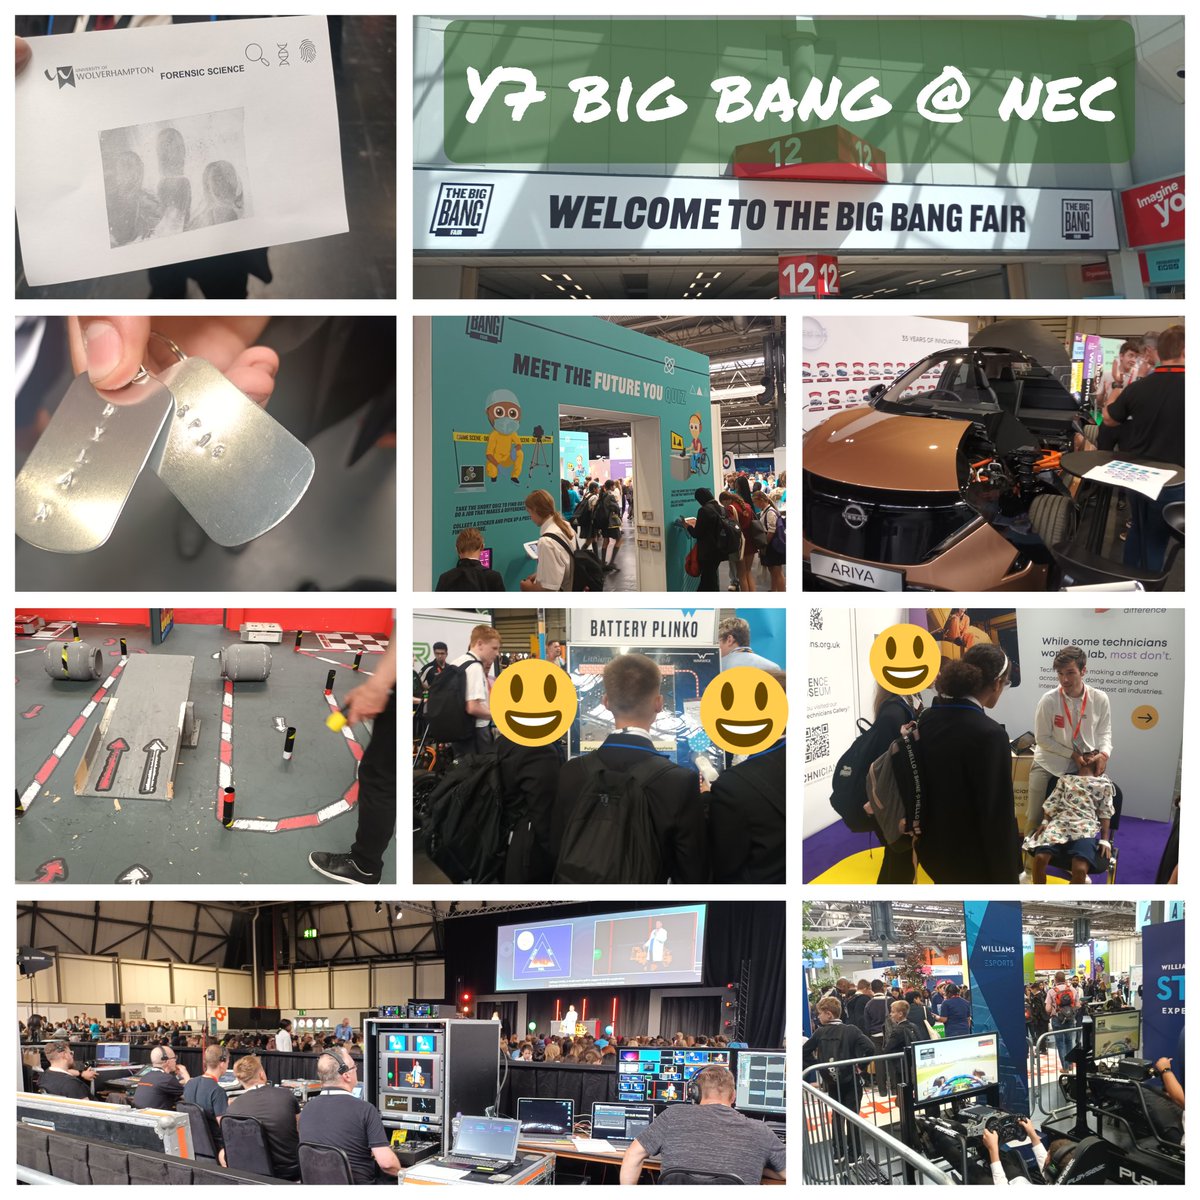 We had a super day at the Big Bang fair at the NEc today. Y7 got to make keyrings, learn about STEM Careers, programme robots and lots of other fun experiments. They also upheld our TPS values beautifully. Well done! #stem #BigBangFair #Careers #aspire #pathways @telfordpriory